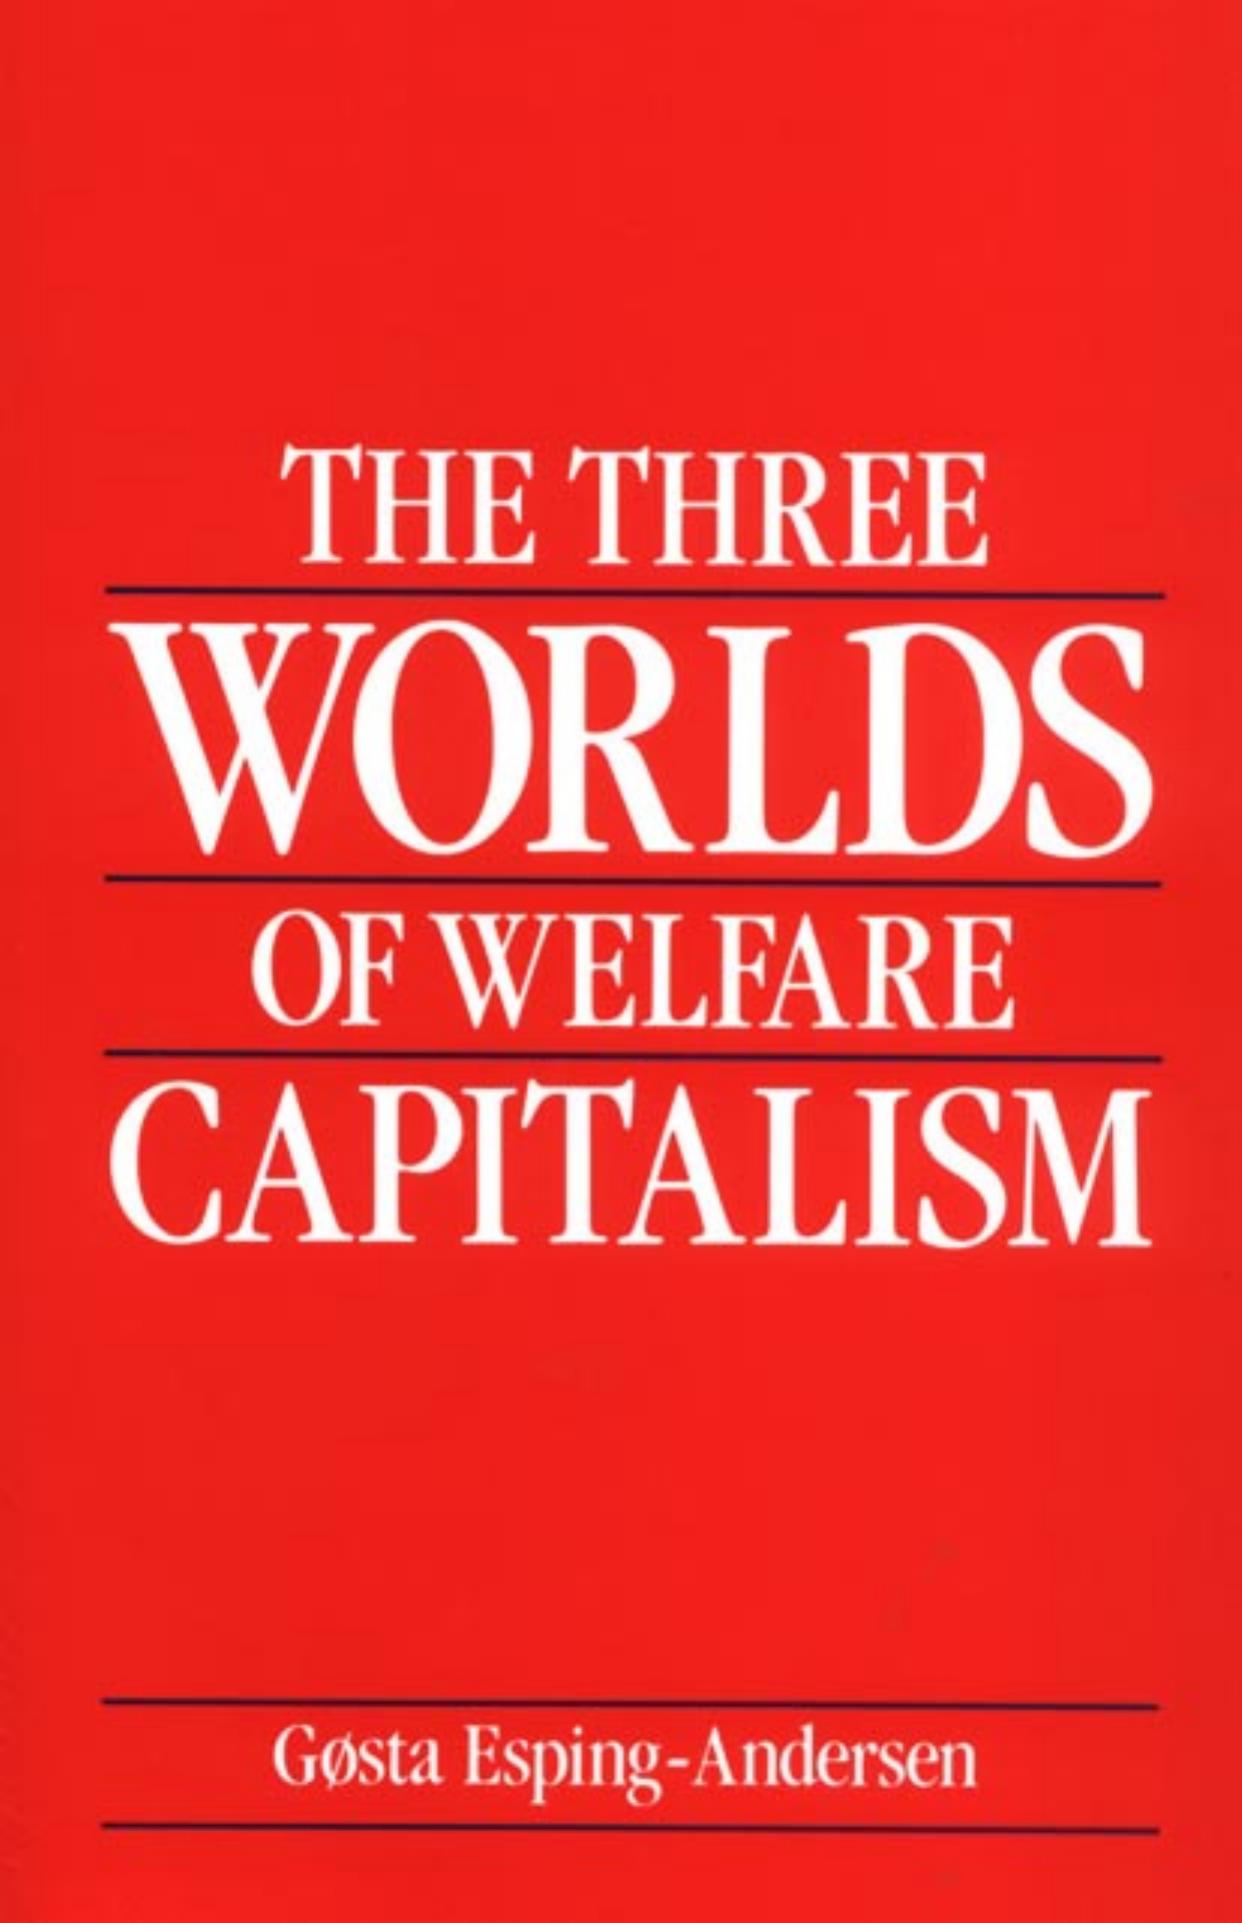 The Three Worlds of Welfare Capitalism by Gosta Esping-Andersen